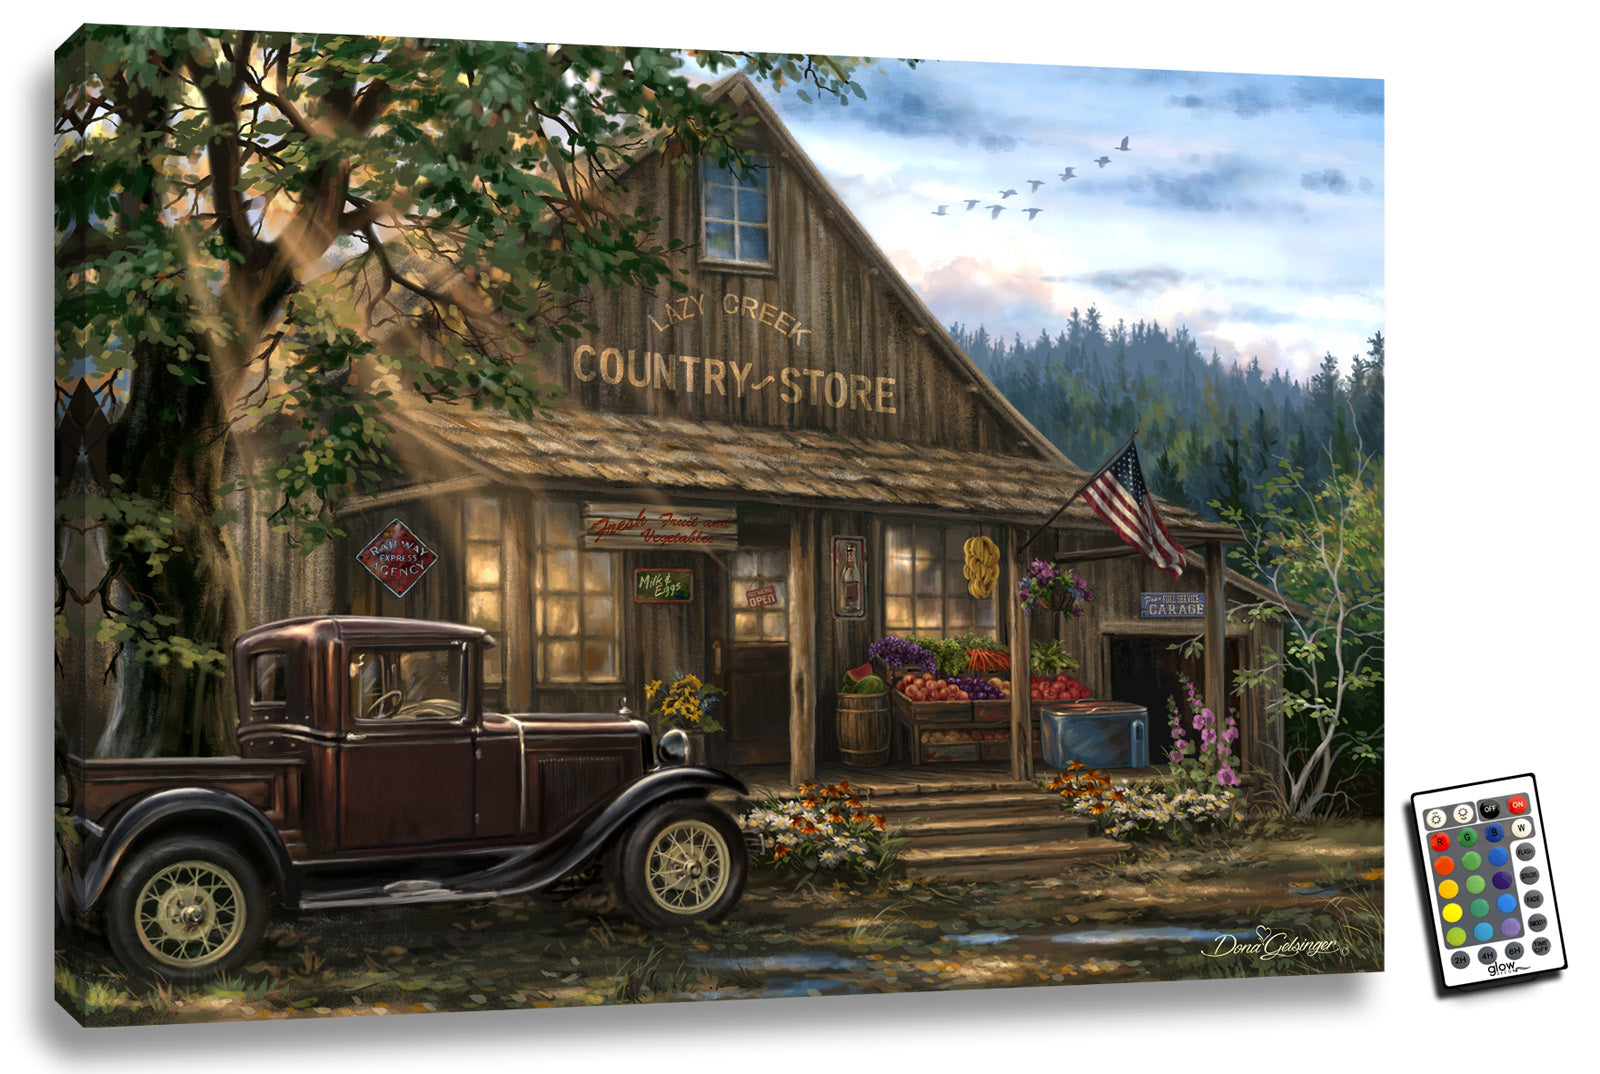 Country Store 18x24 Fully Illuminated LED Art. An old school country store 